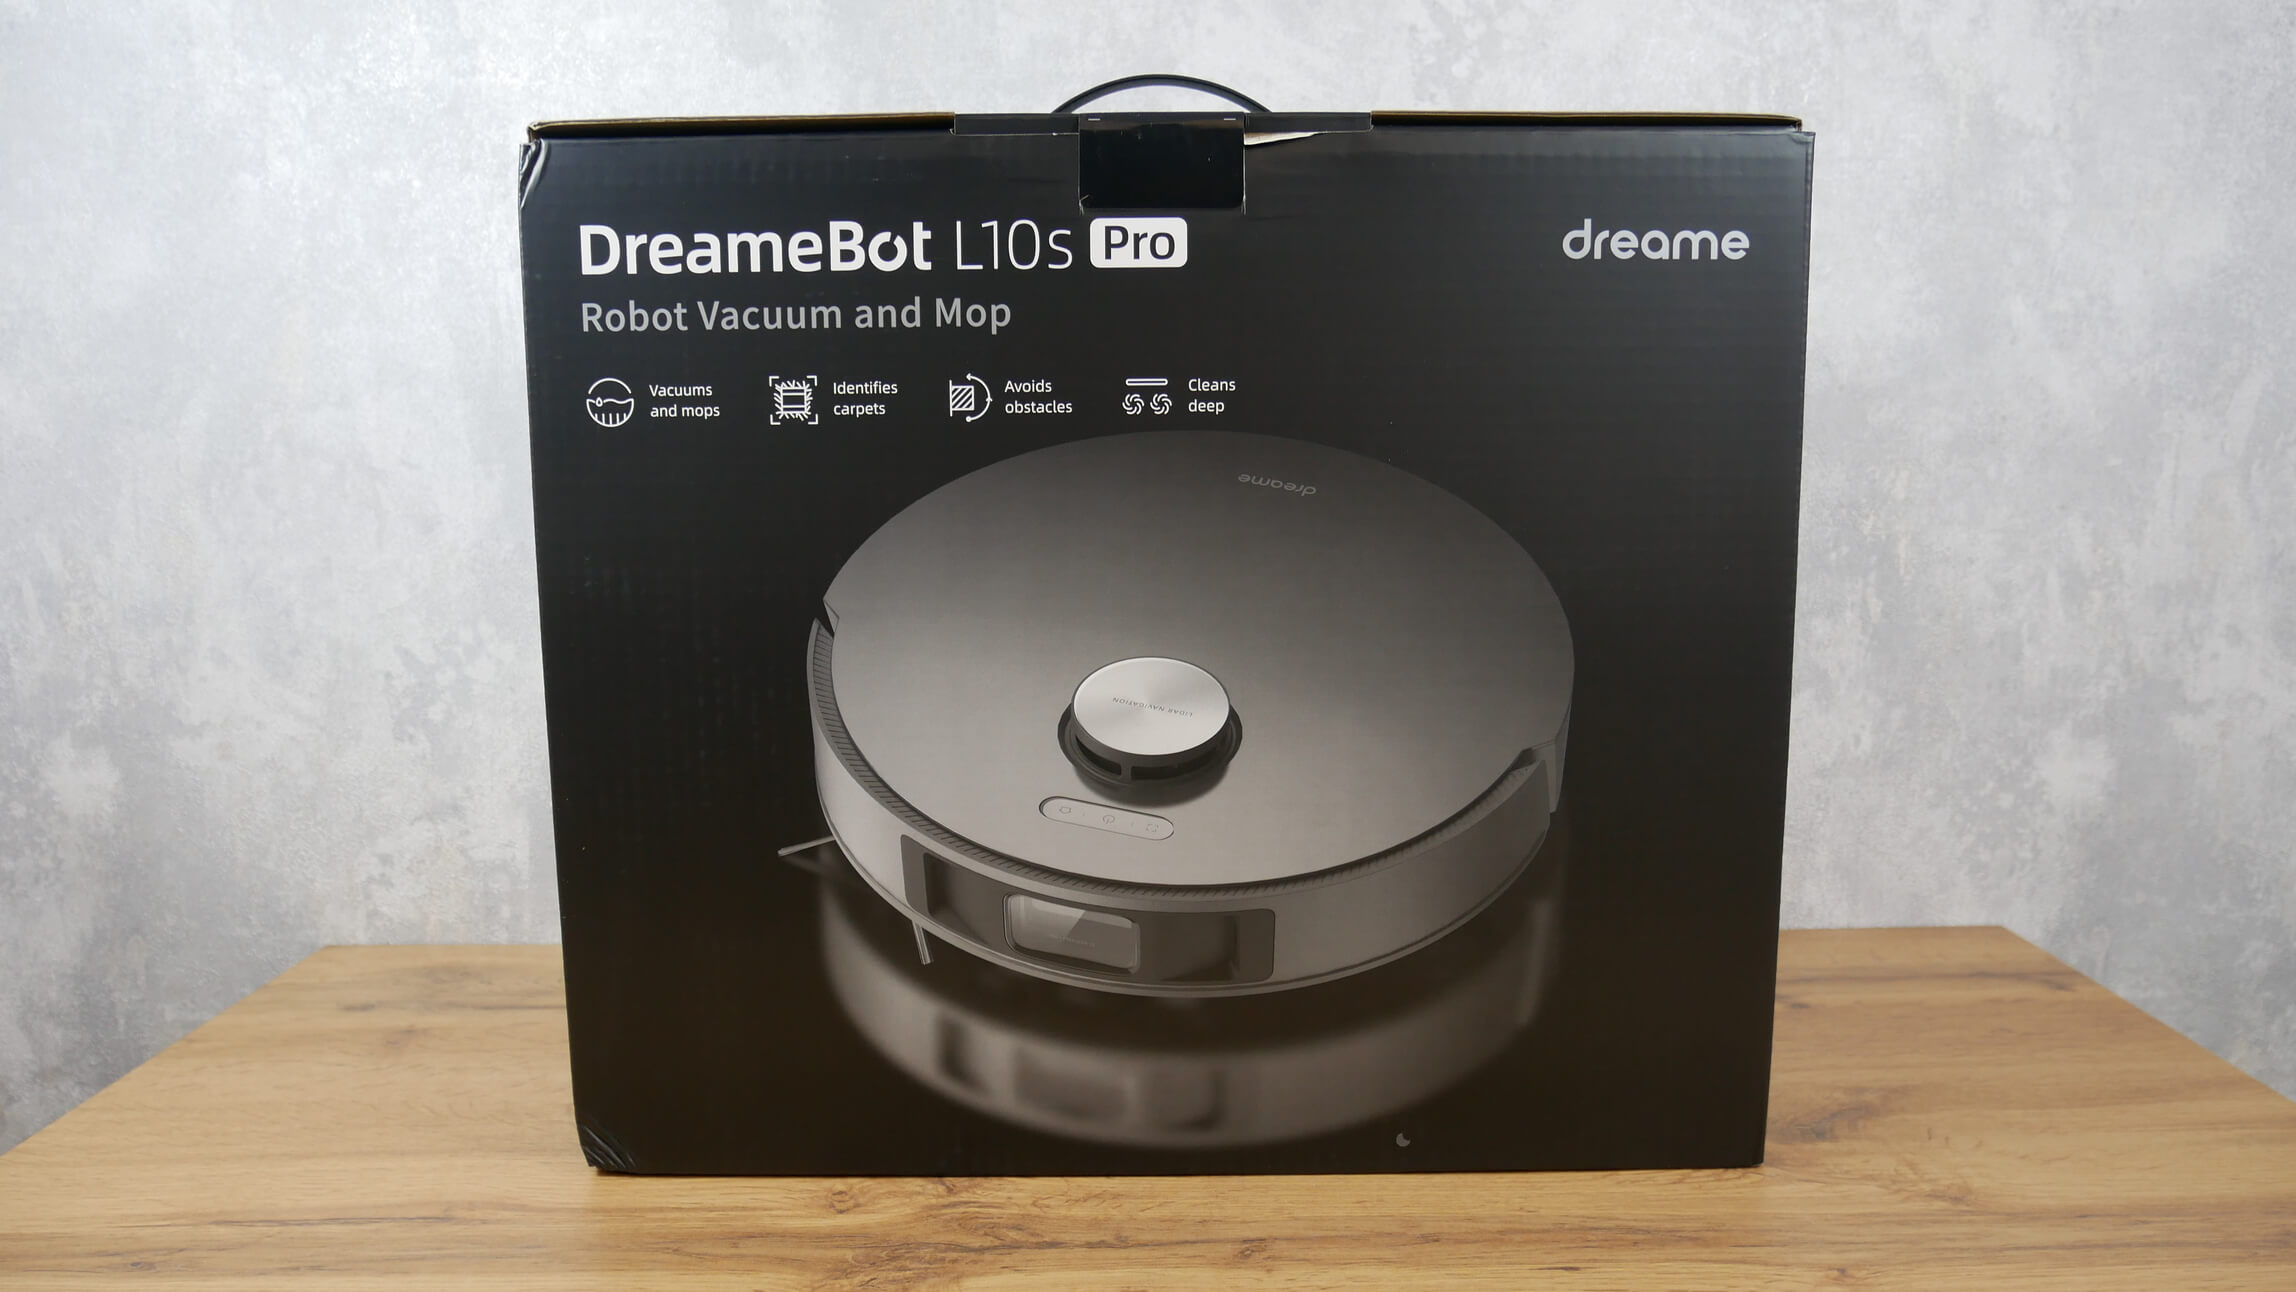 Dreame Bot L10s Pro Review & Test✓ Simplified version of the